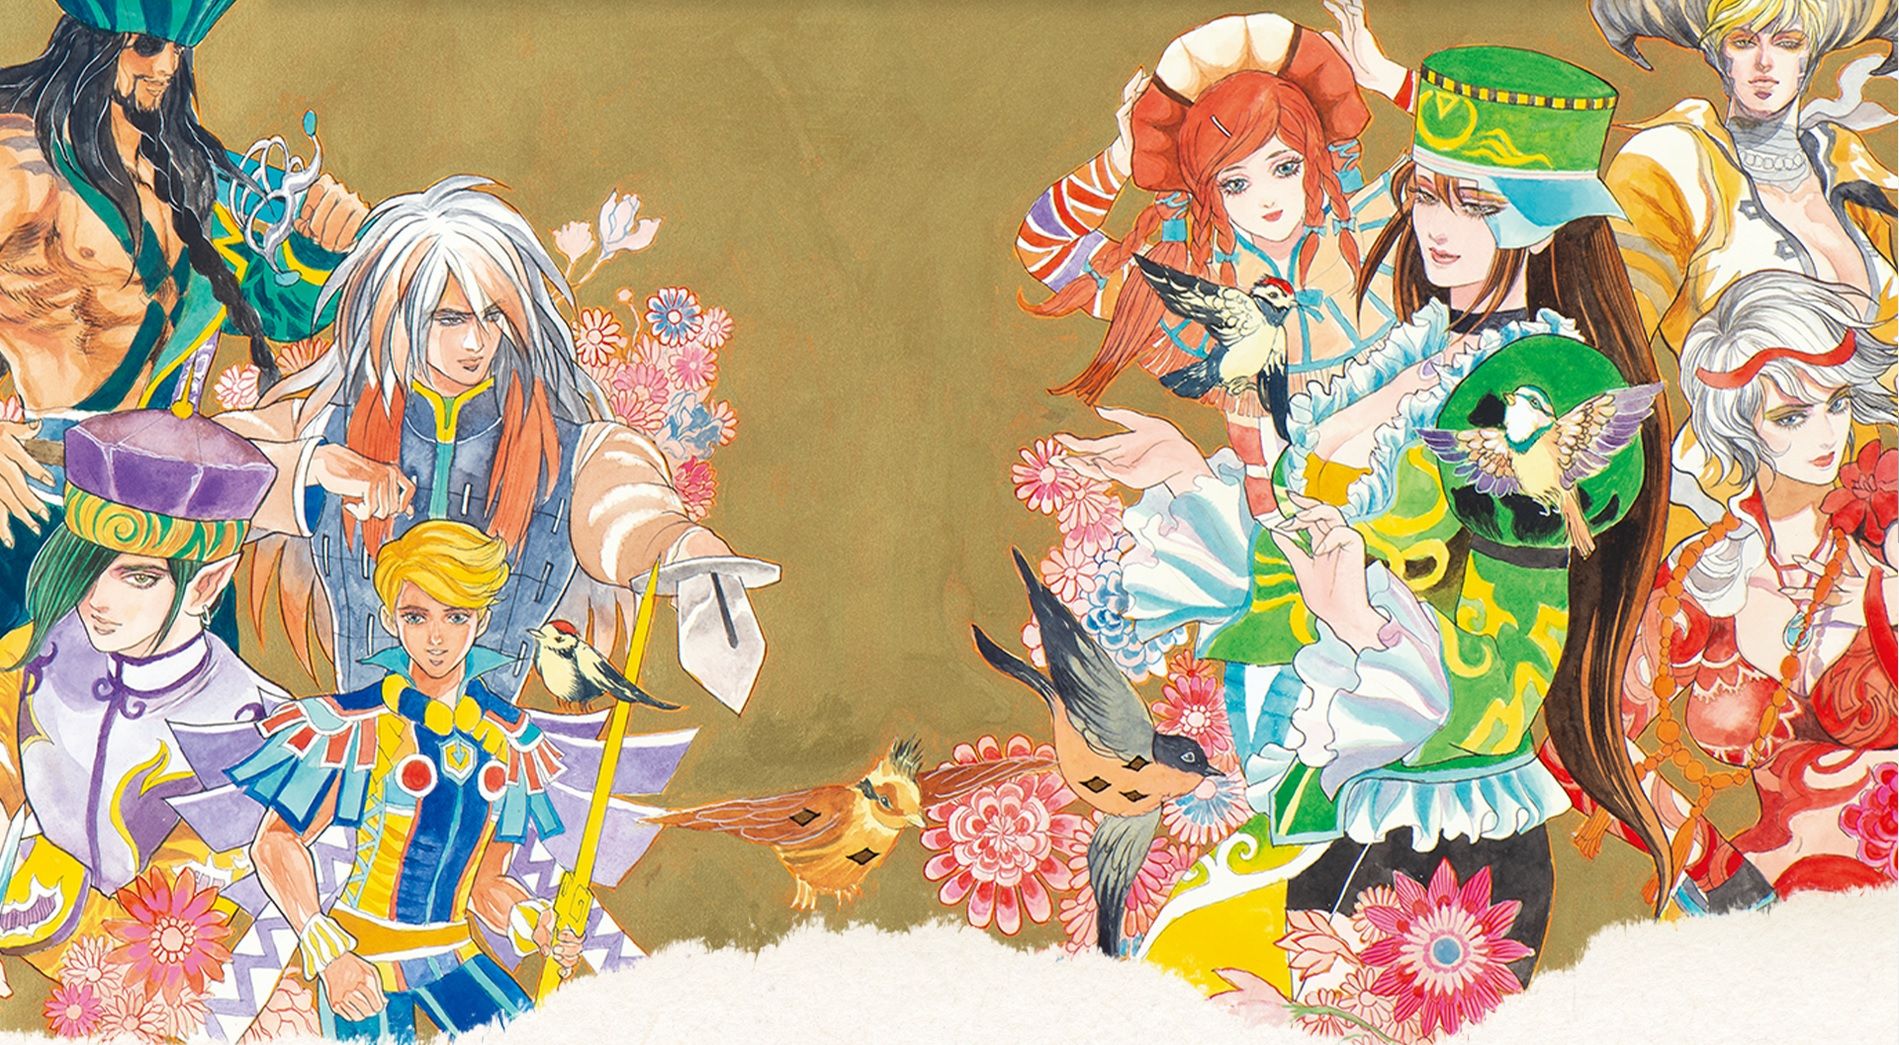 Romancing SaGa Minstrel Song Remastered Staff Comments, More Games Teased